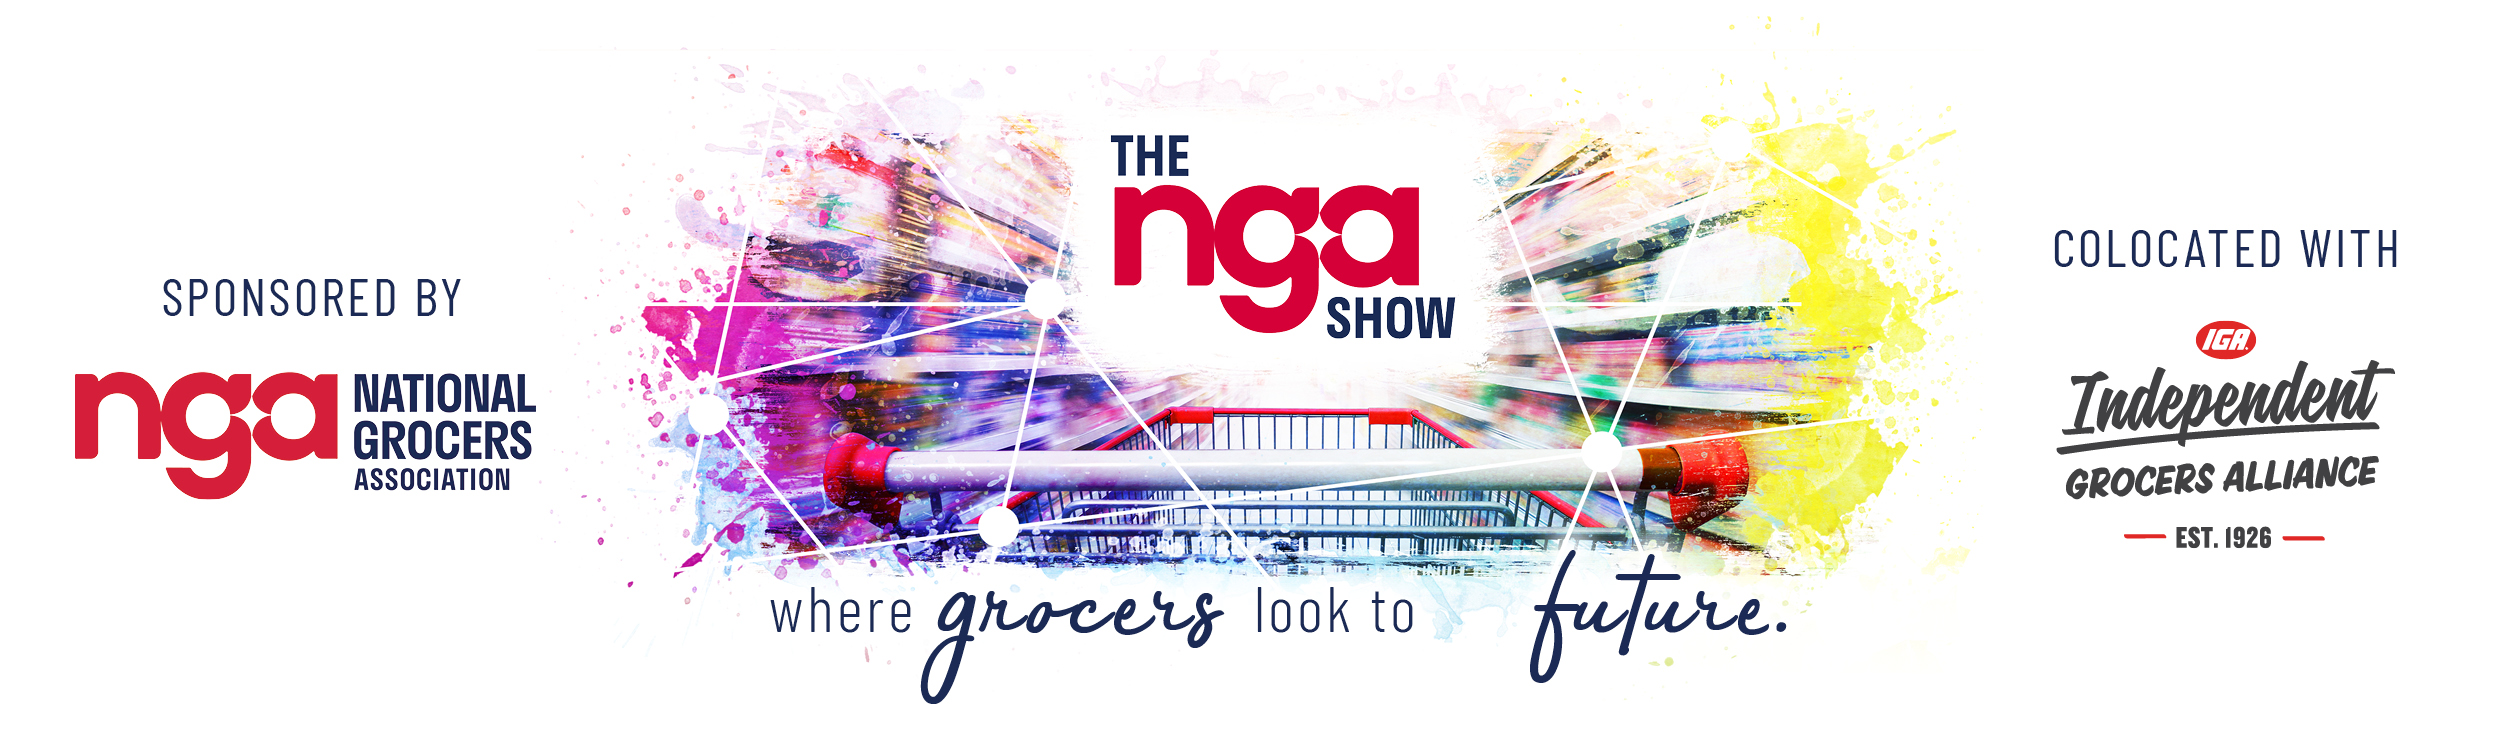 The NGA Show Co-located with Independent Grocers Alliance